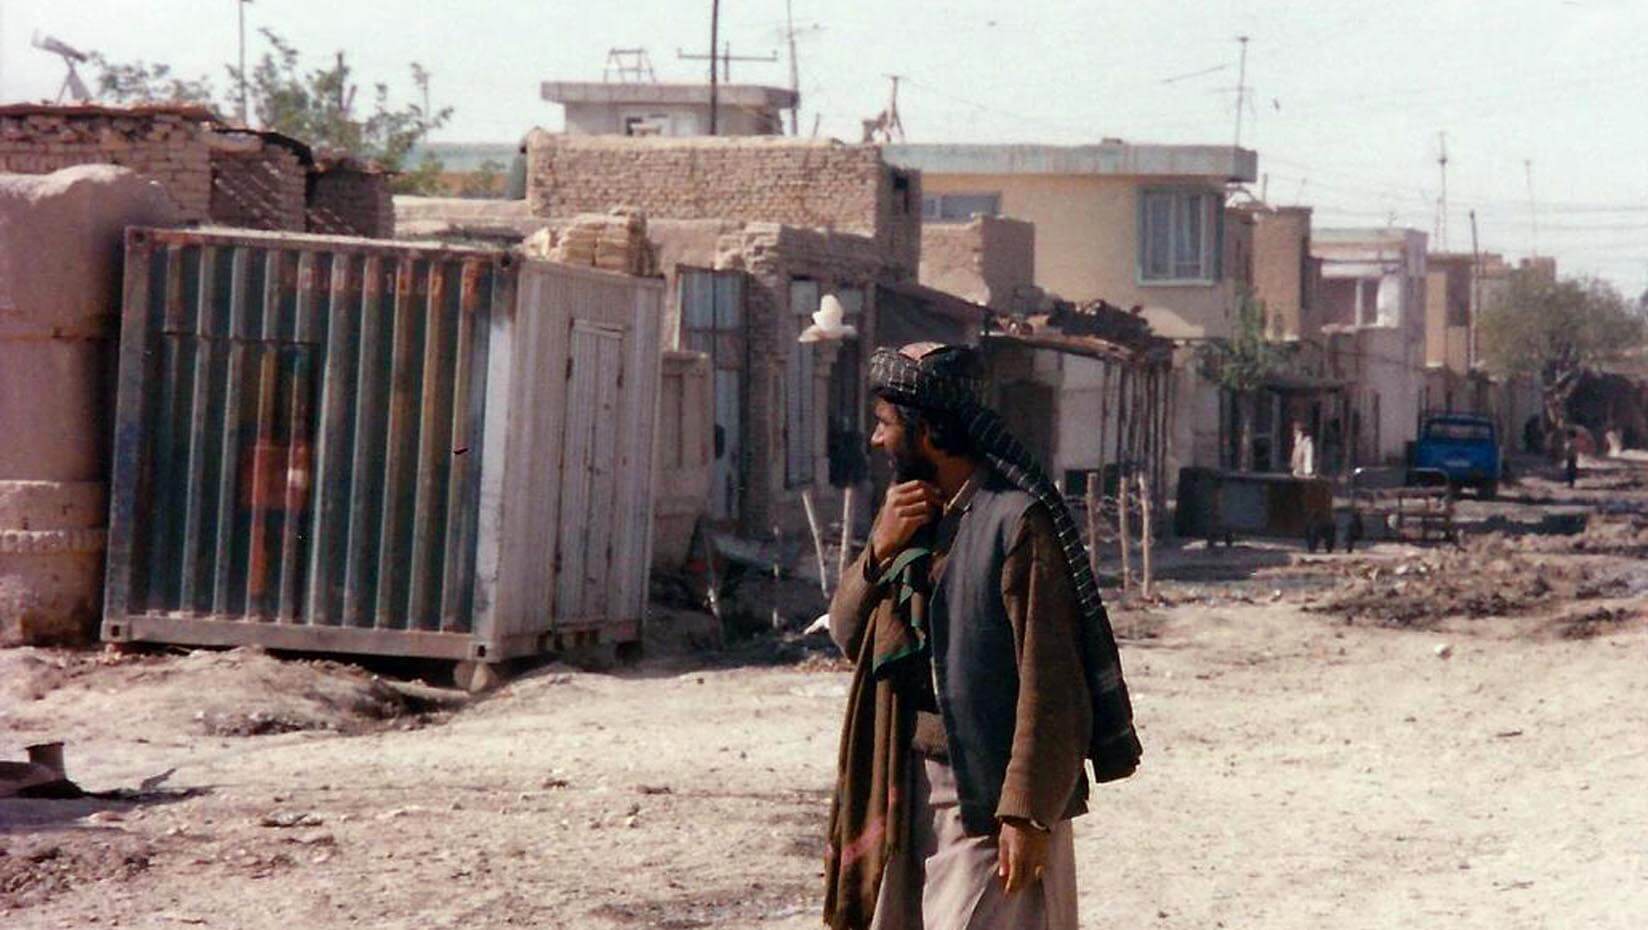 A photo of a person standing outside in Afghanistan